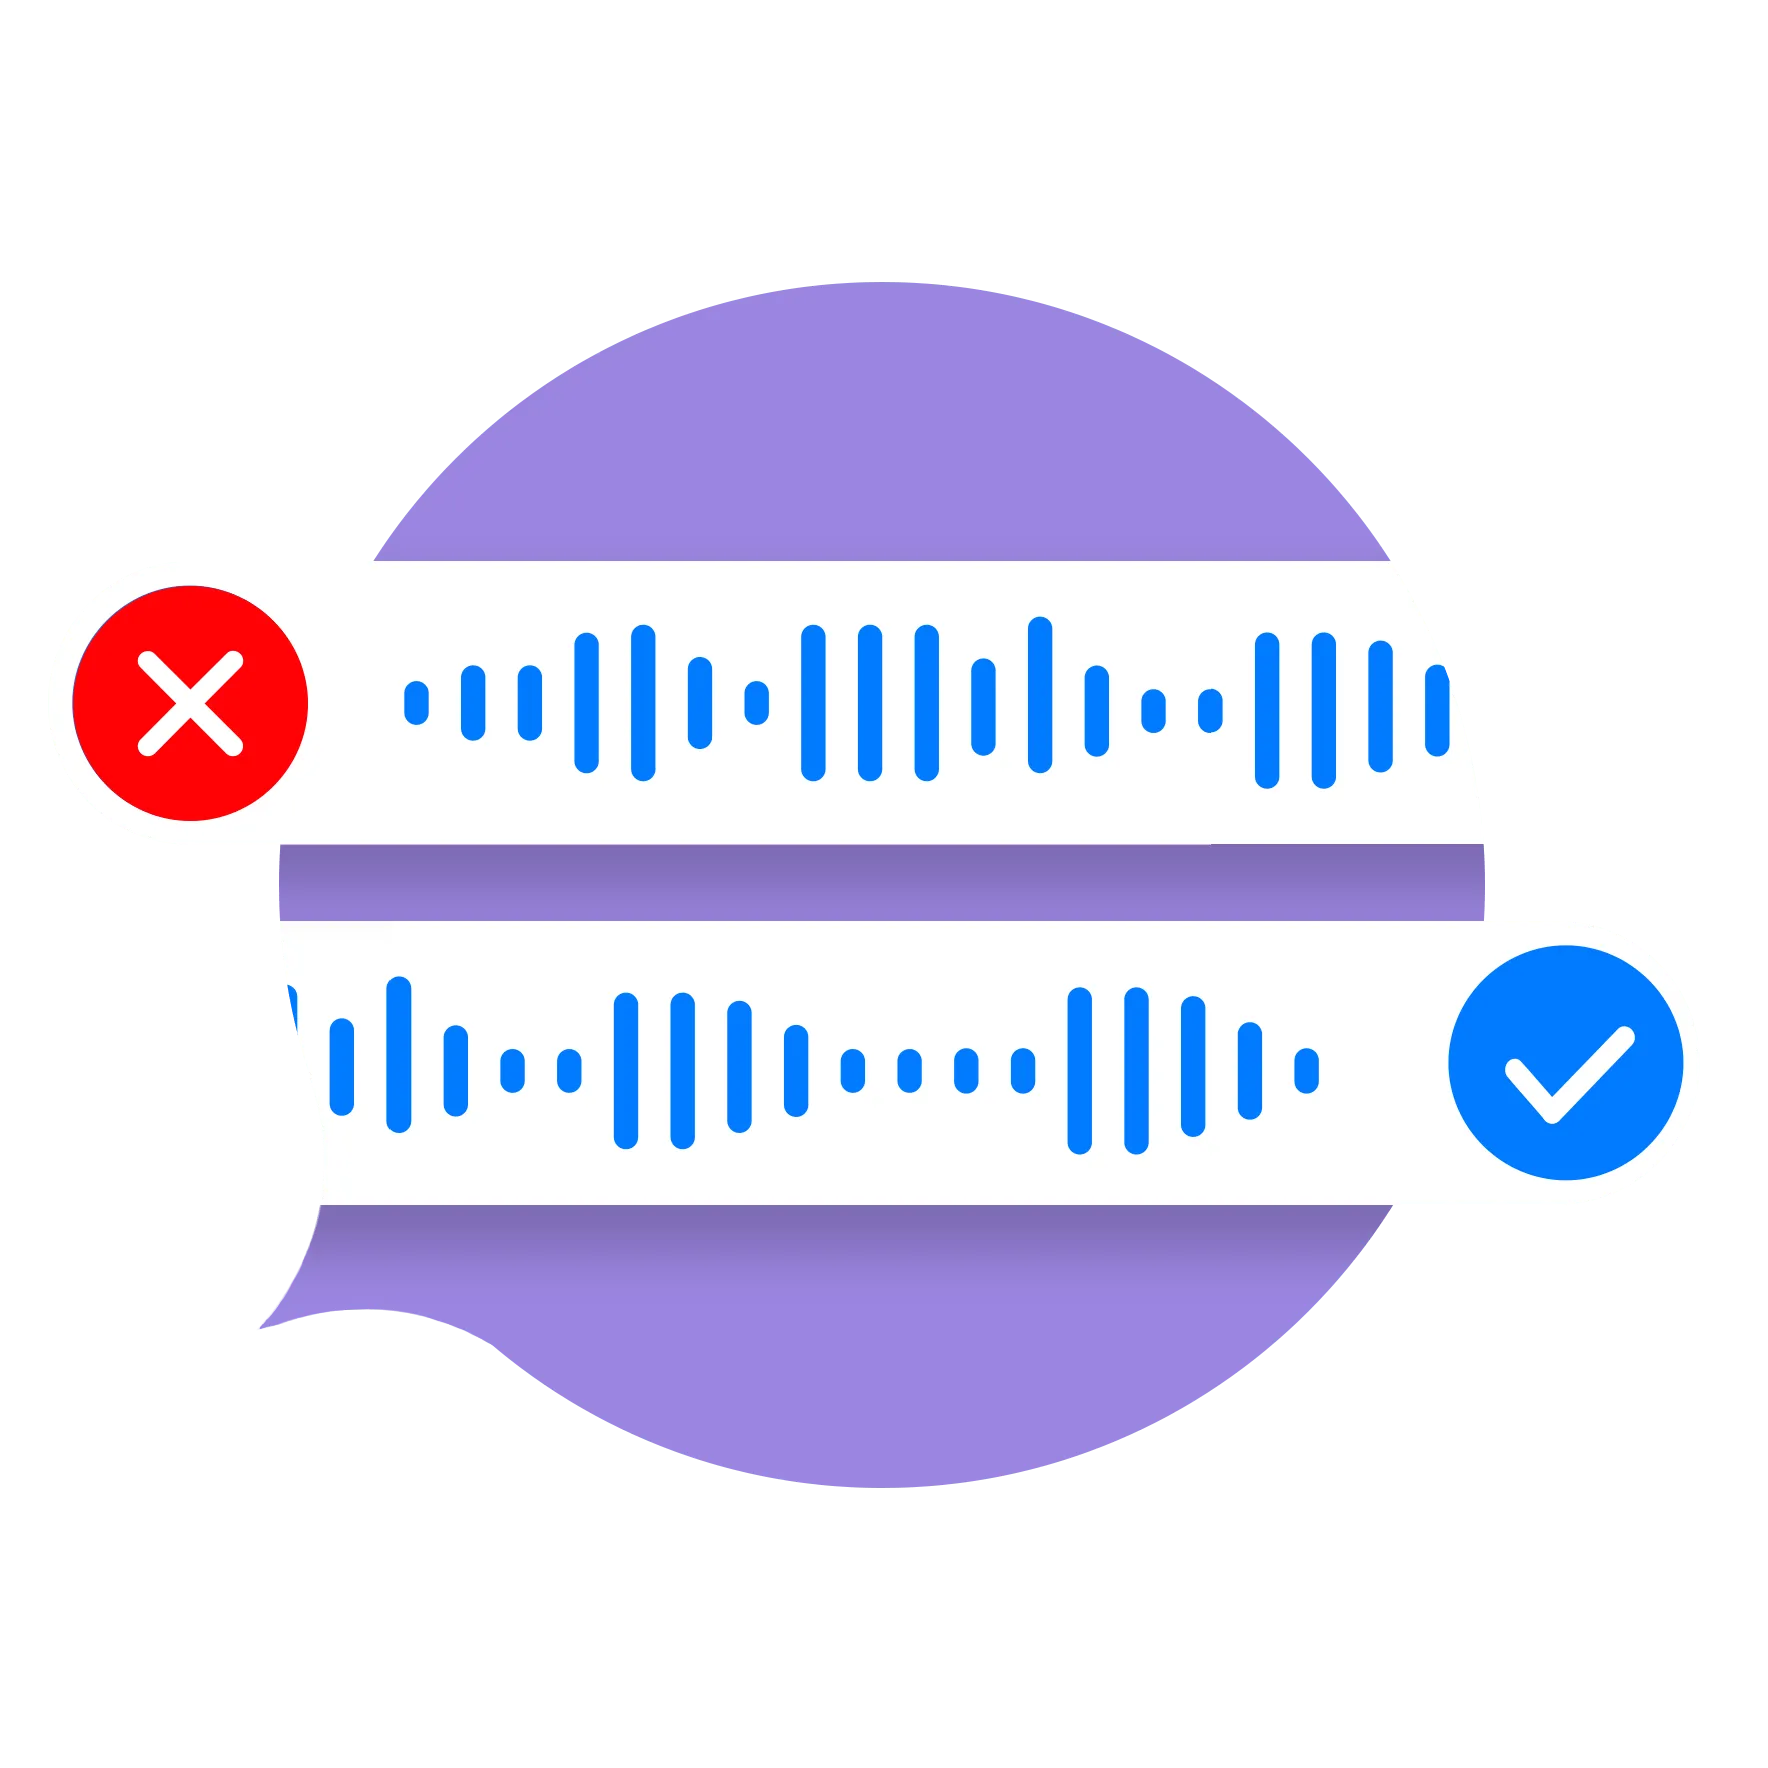 Send Voice messages over email